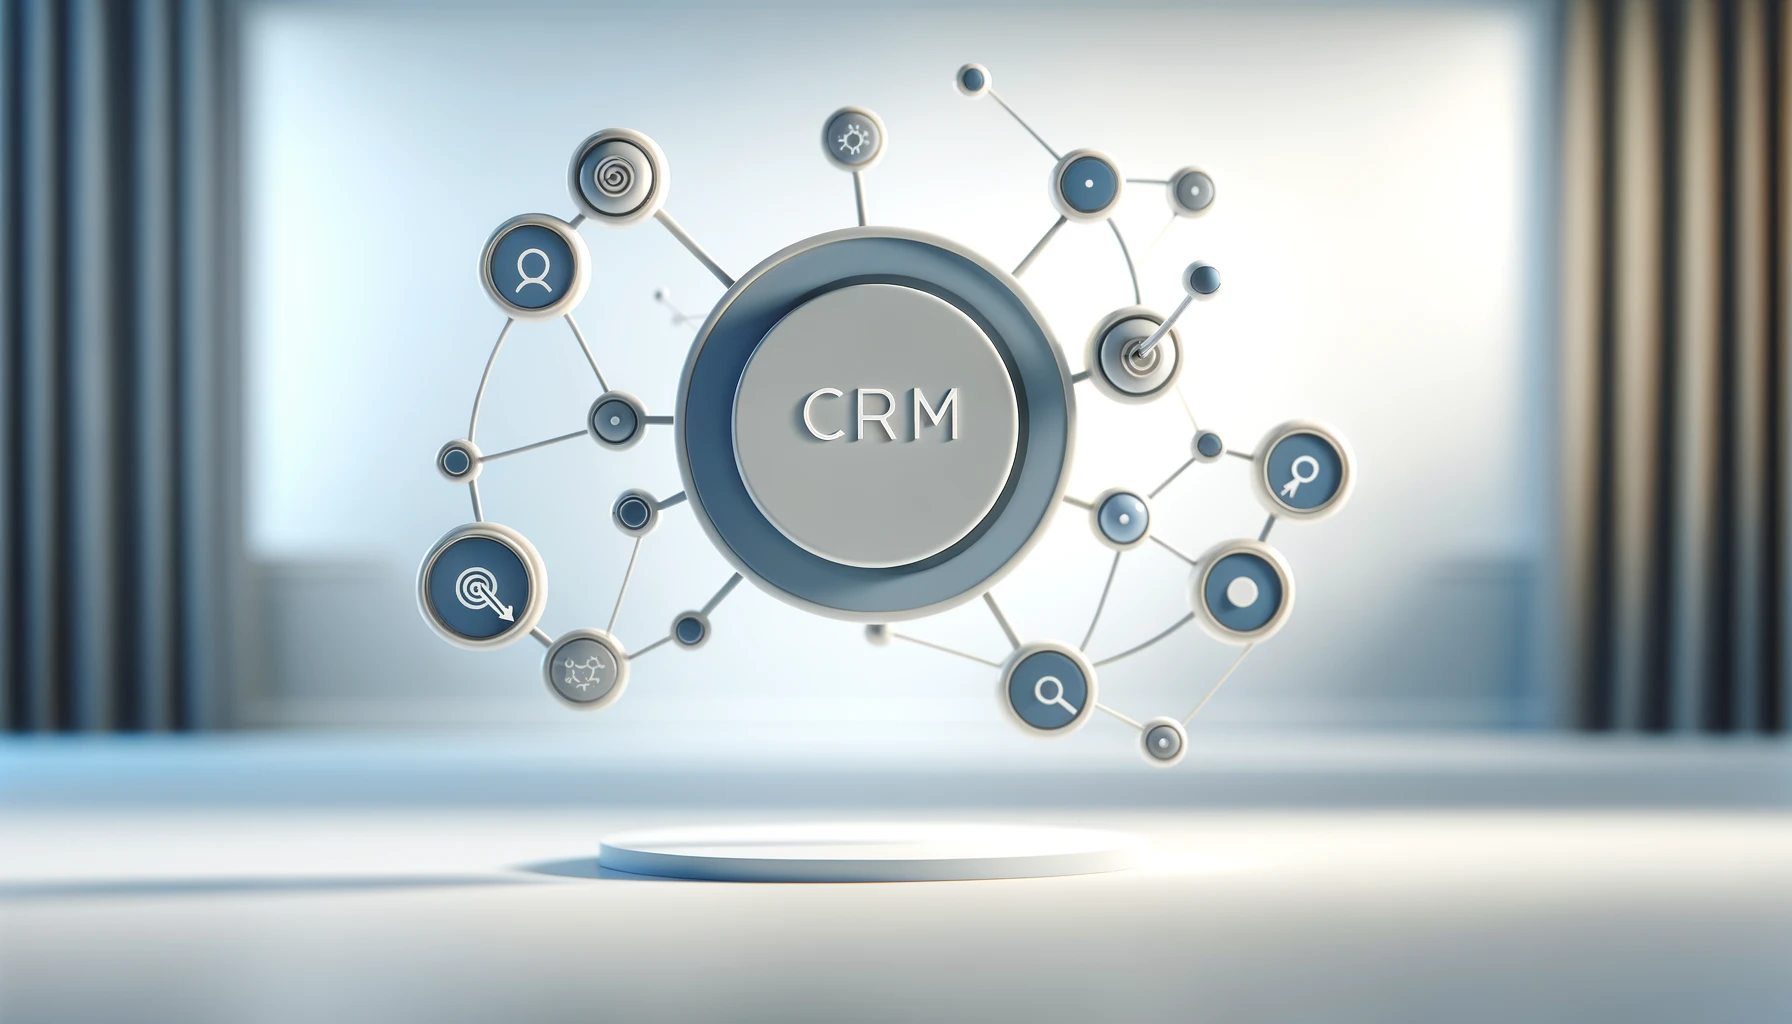 Exploring CRM: What Does It Stand For